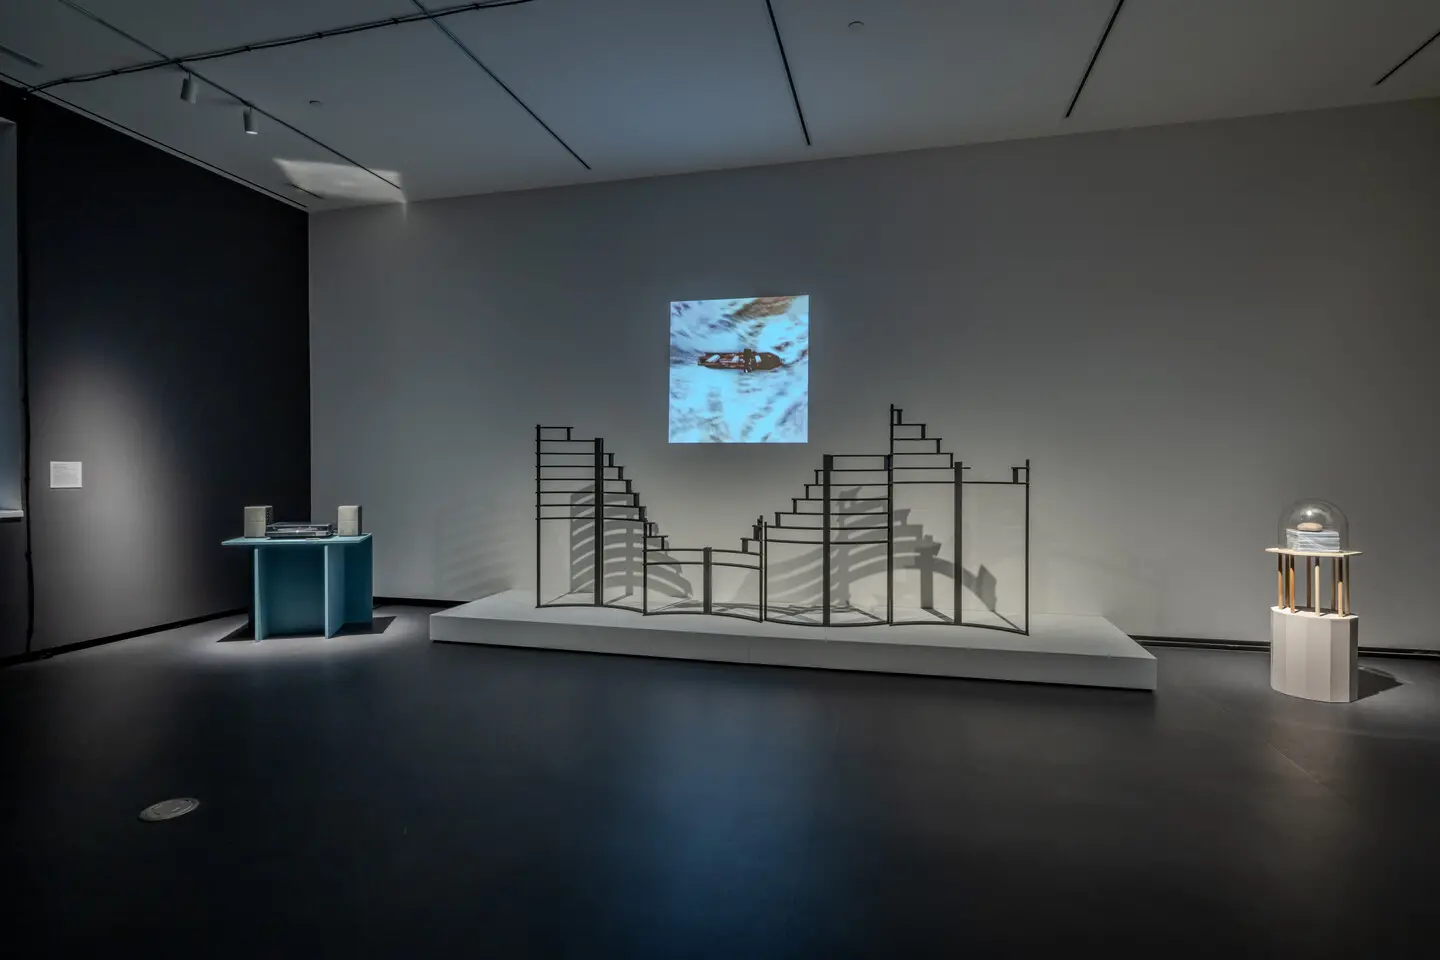 An art exhibition features a minimalist room with a staircase-like sculpture on a white platform, a spherical object on a stand to the right, and a blue table with objects to the left. A video is projected onto the wall behind the sculpture.